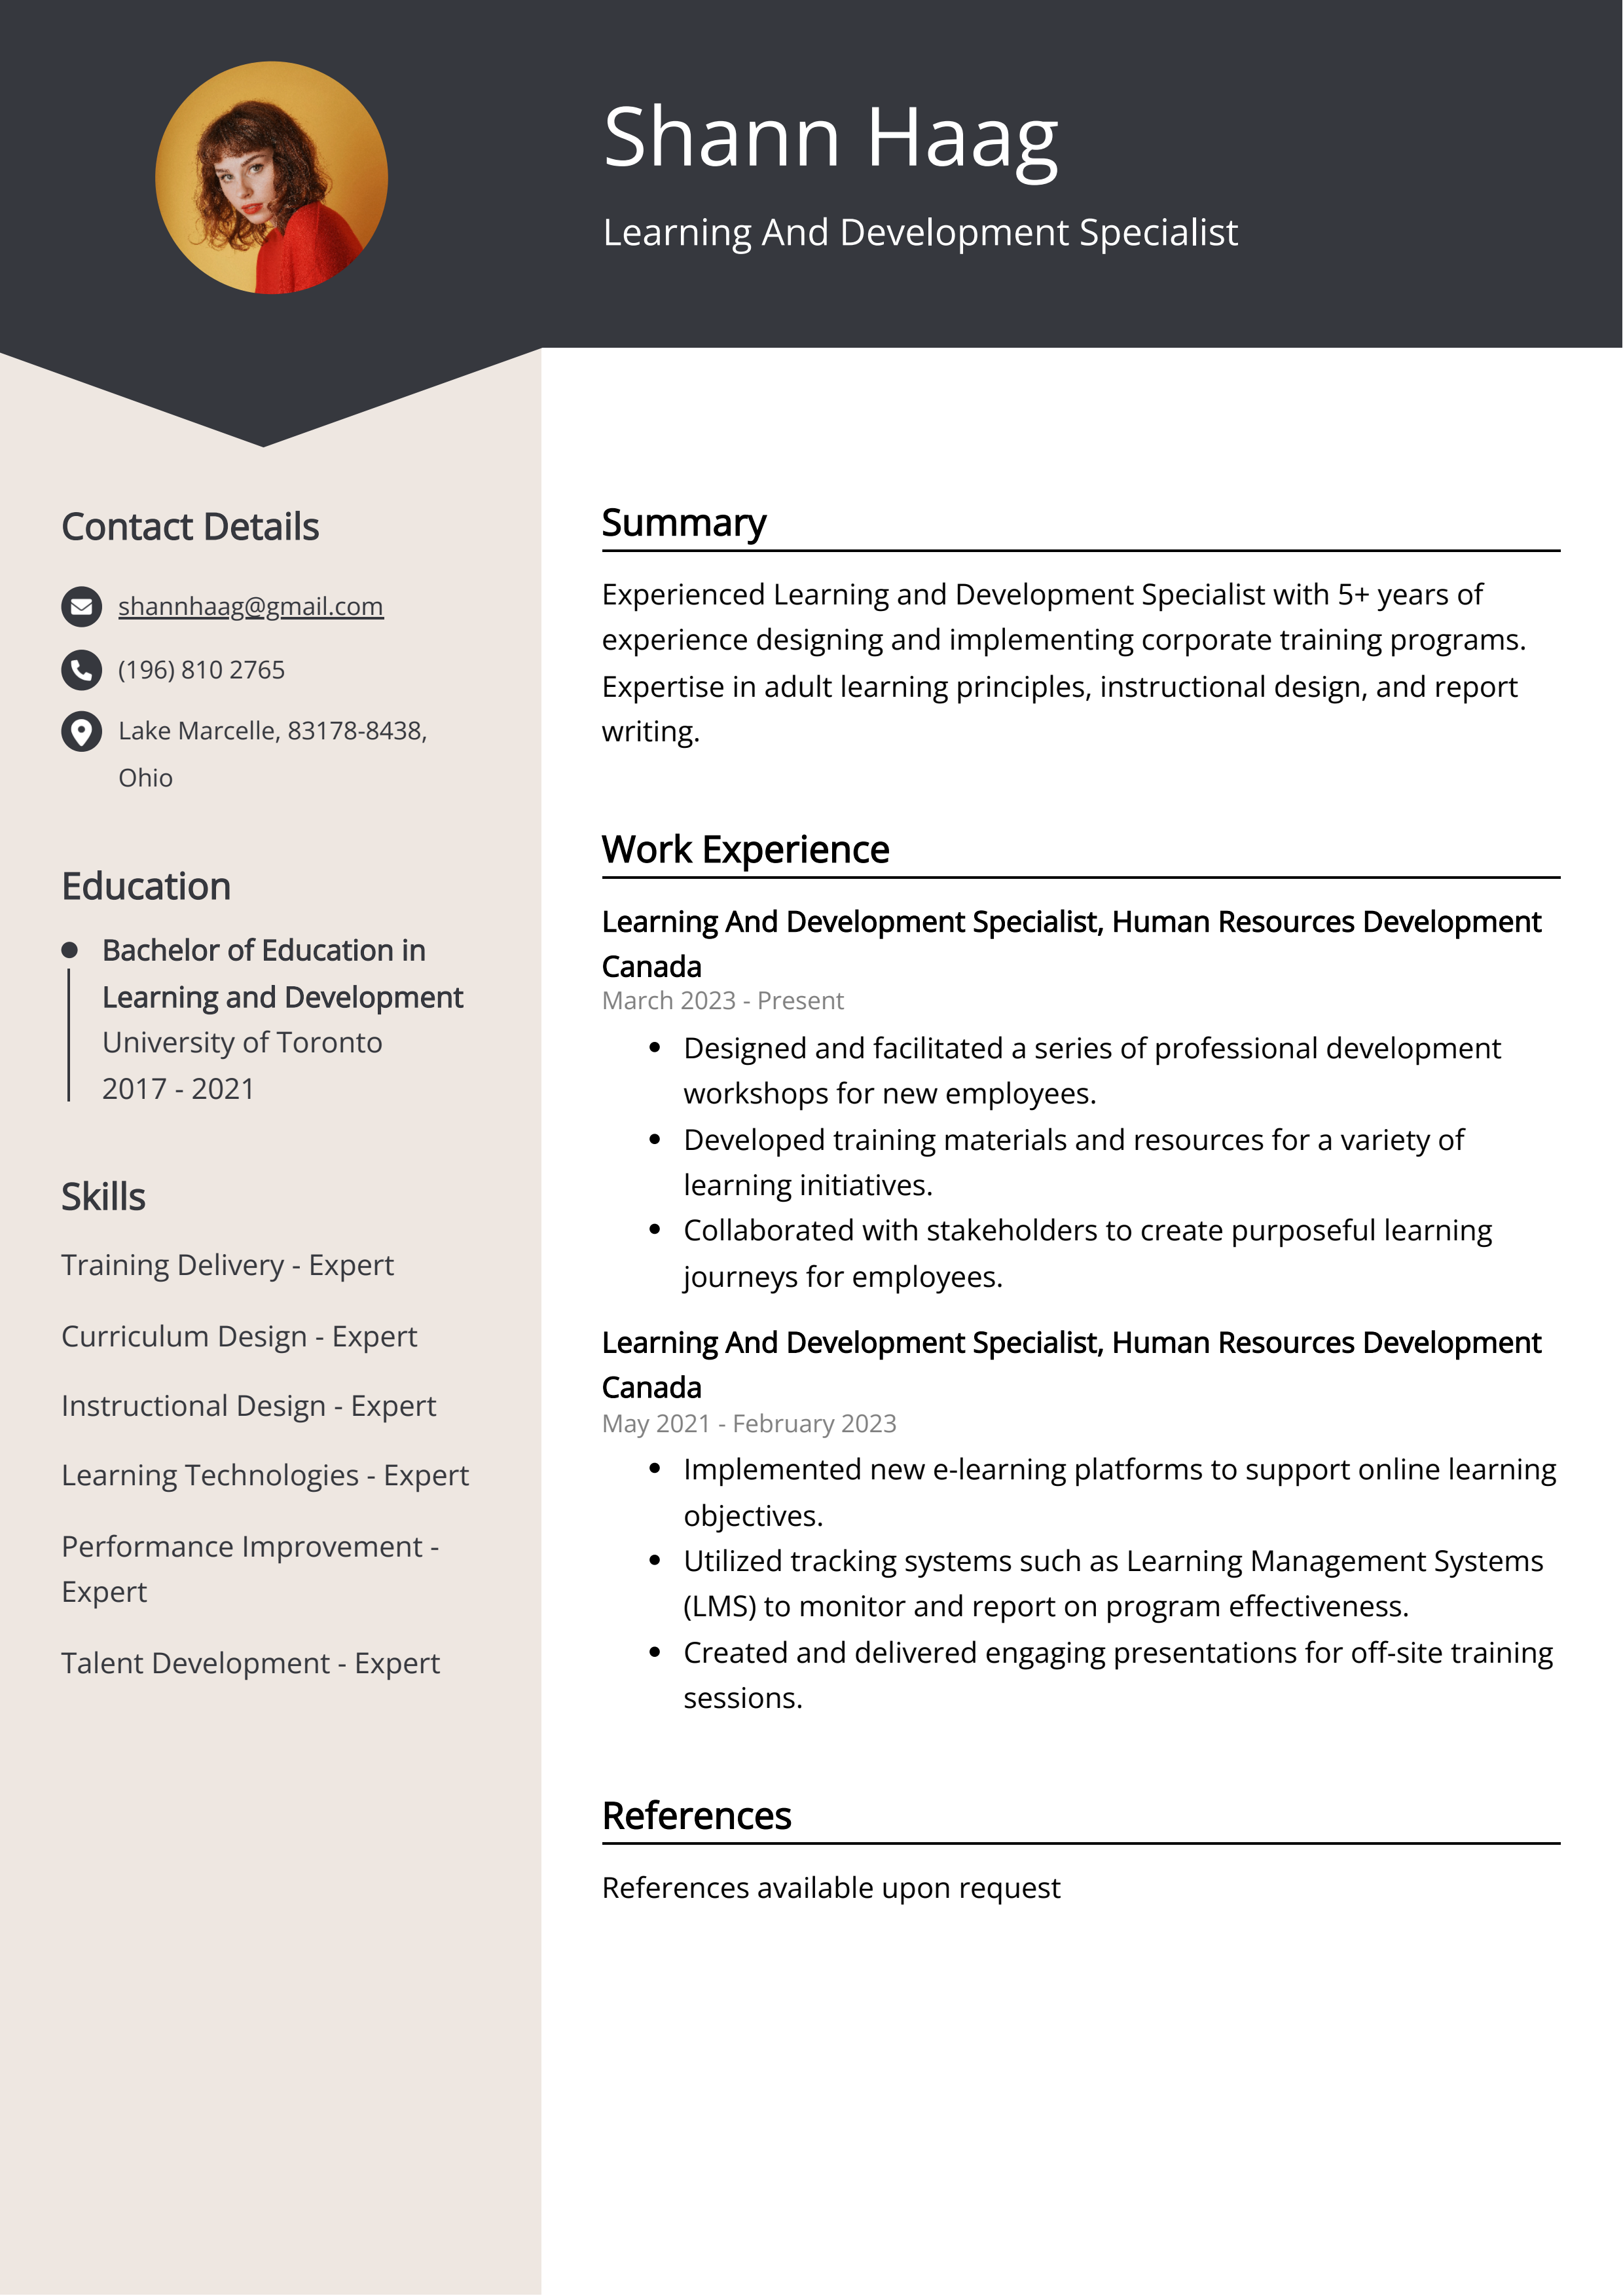 Learning And Development Specialist CV Example